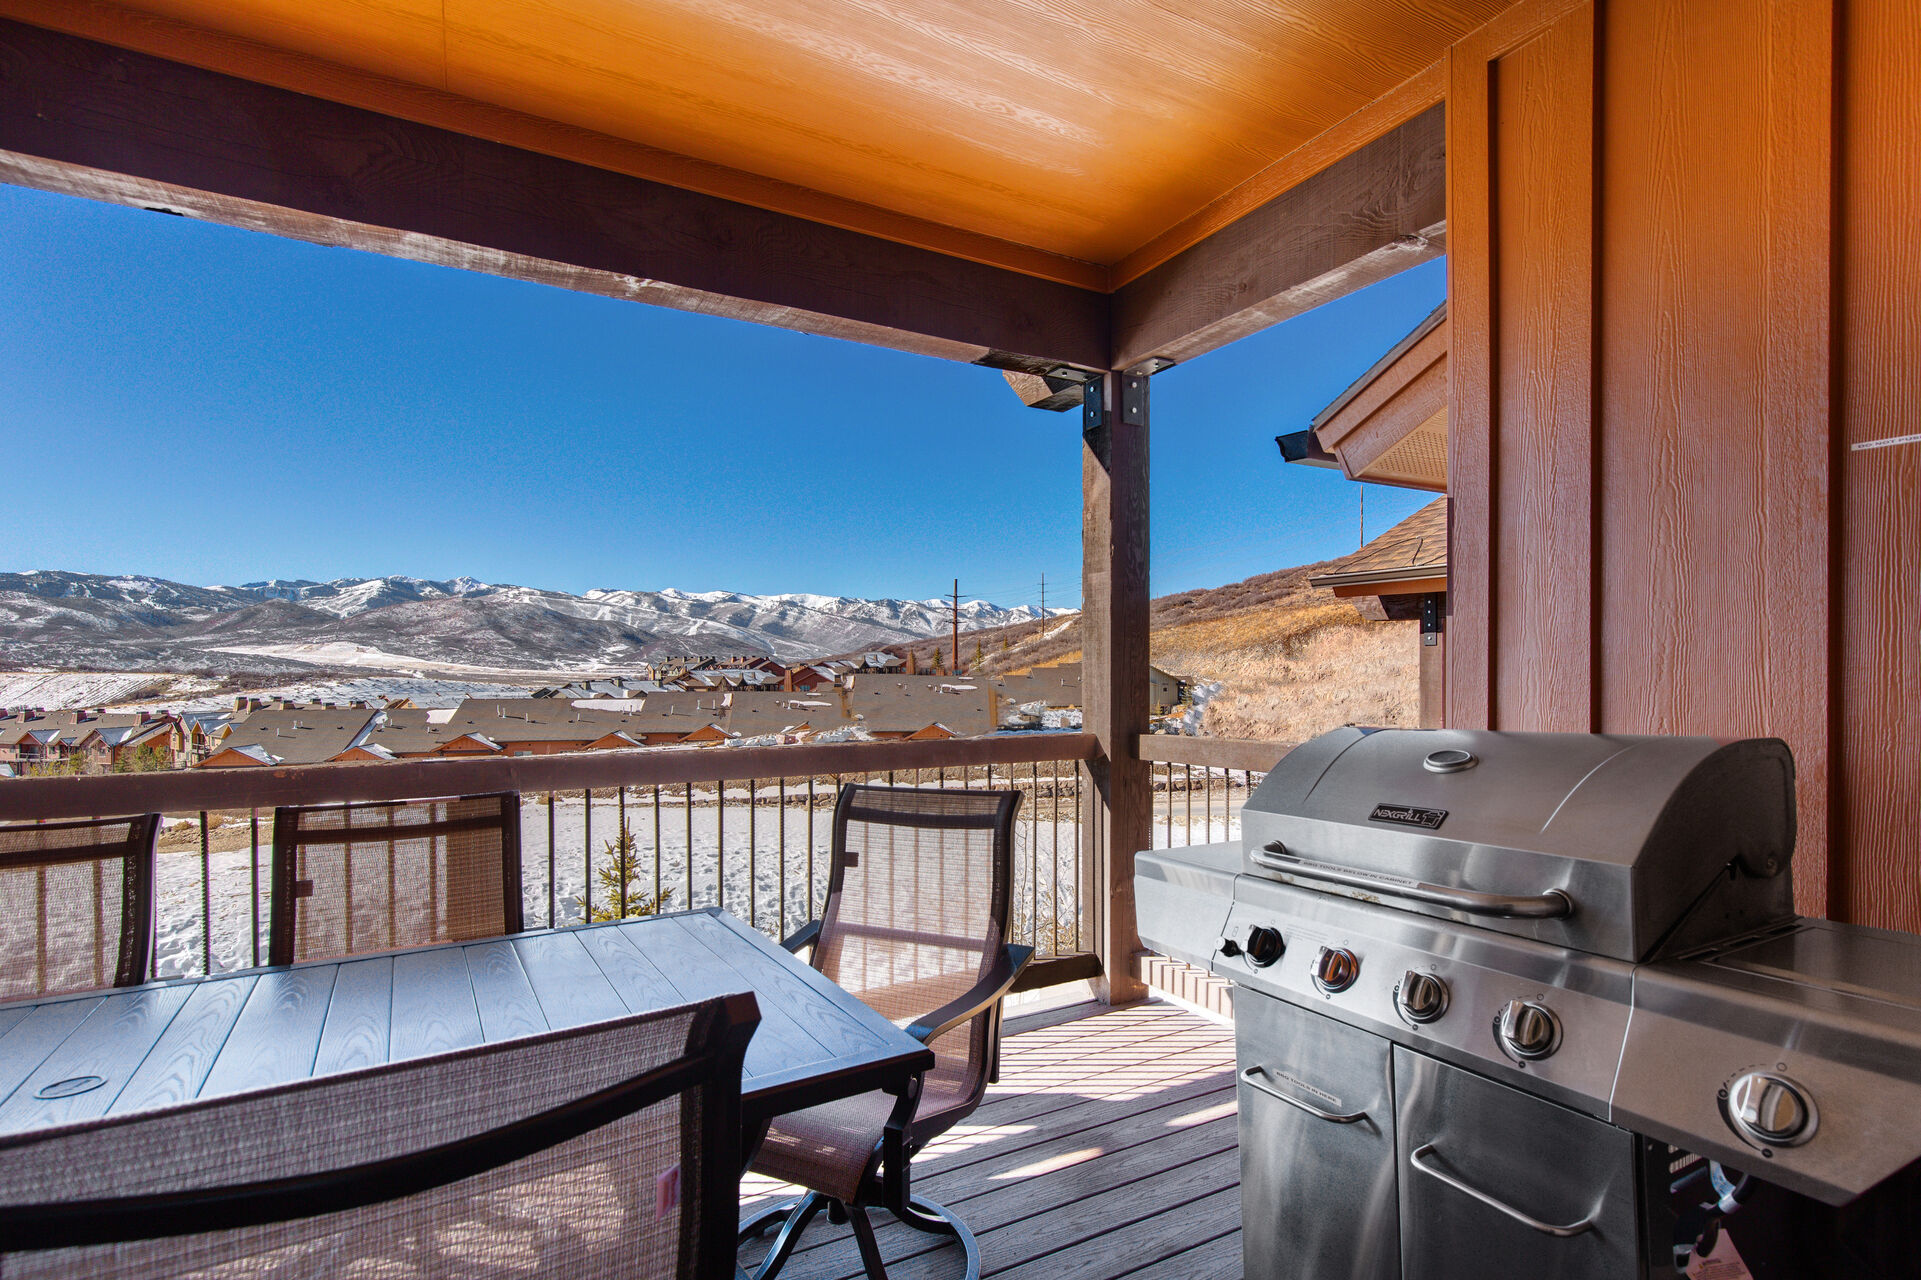 Large BBQ and stunning mountain views